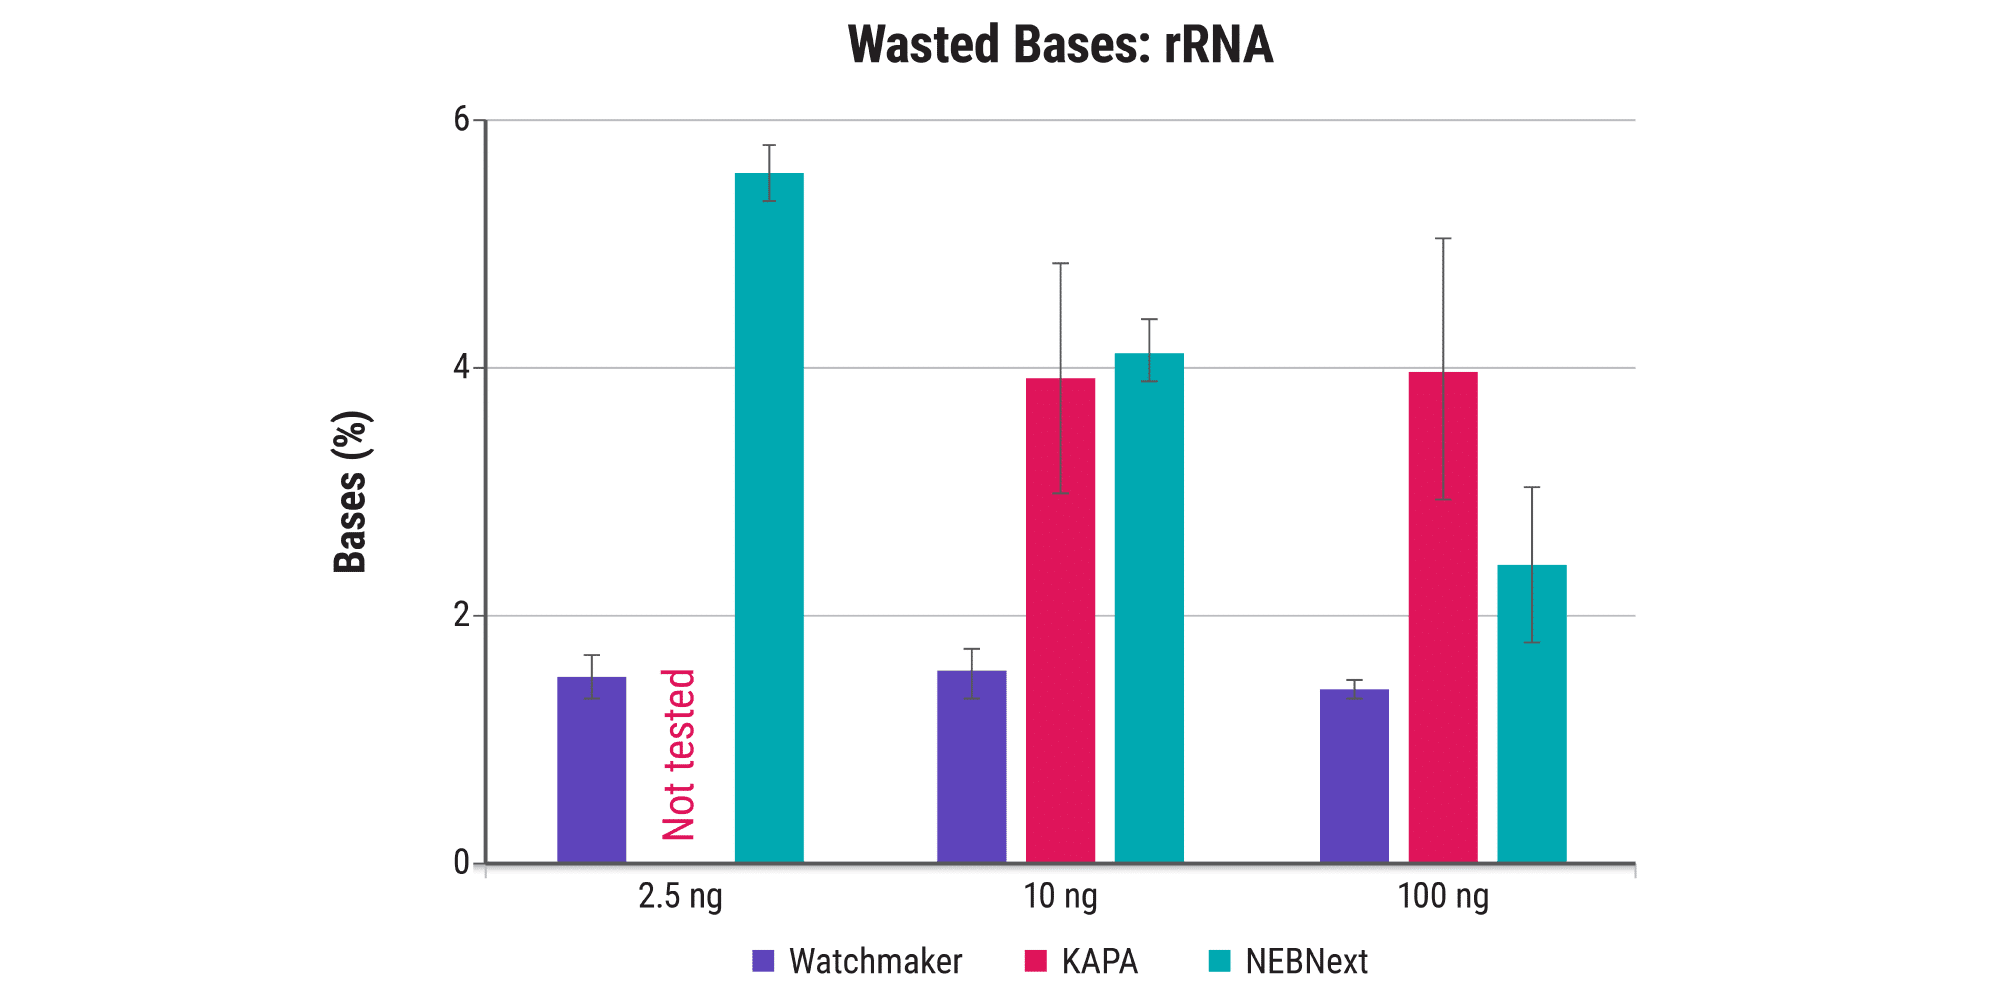 Figure 4A. Waste fewer bases to rRNA contamination. RNA extracted from breast tissue (RIN 7) was used to prepare libraries in quadruplicate from a range of RNA mass inputs, as indicated, using the Watchmaker mRNA Library Prep Kit, KAPA mRNA HyperPrep Kit, and the NEBNext® Ultra™ II Directional RNA Library Prep Kit with poly(A) mRNA Enrichment. Supplier recommendations were used for each workflow. KAPA failed to produce libraries at 2.5 ng. One replicate KAPA library was omitted from analysis due to higher than anticipated residual rRNA. Libraries were downsampled to 5M reads.   The Watchmaker solution results in efficient mRNA enrichment across the full RNA input range to reduce residual rRNA.